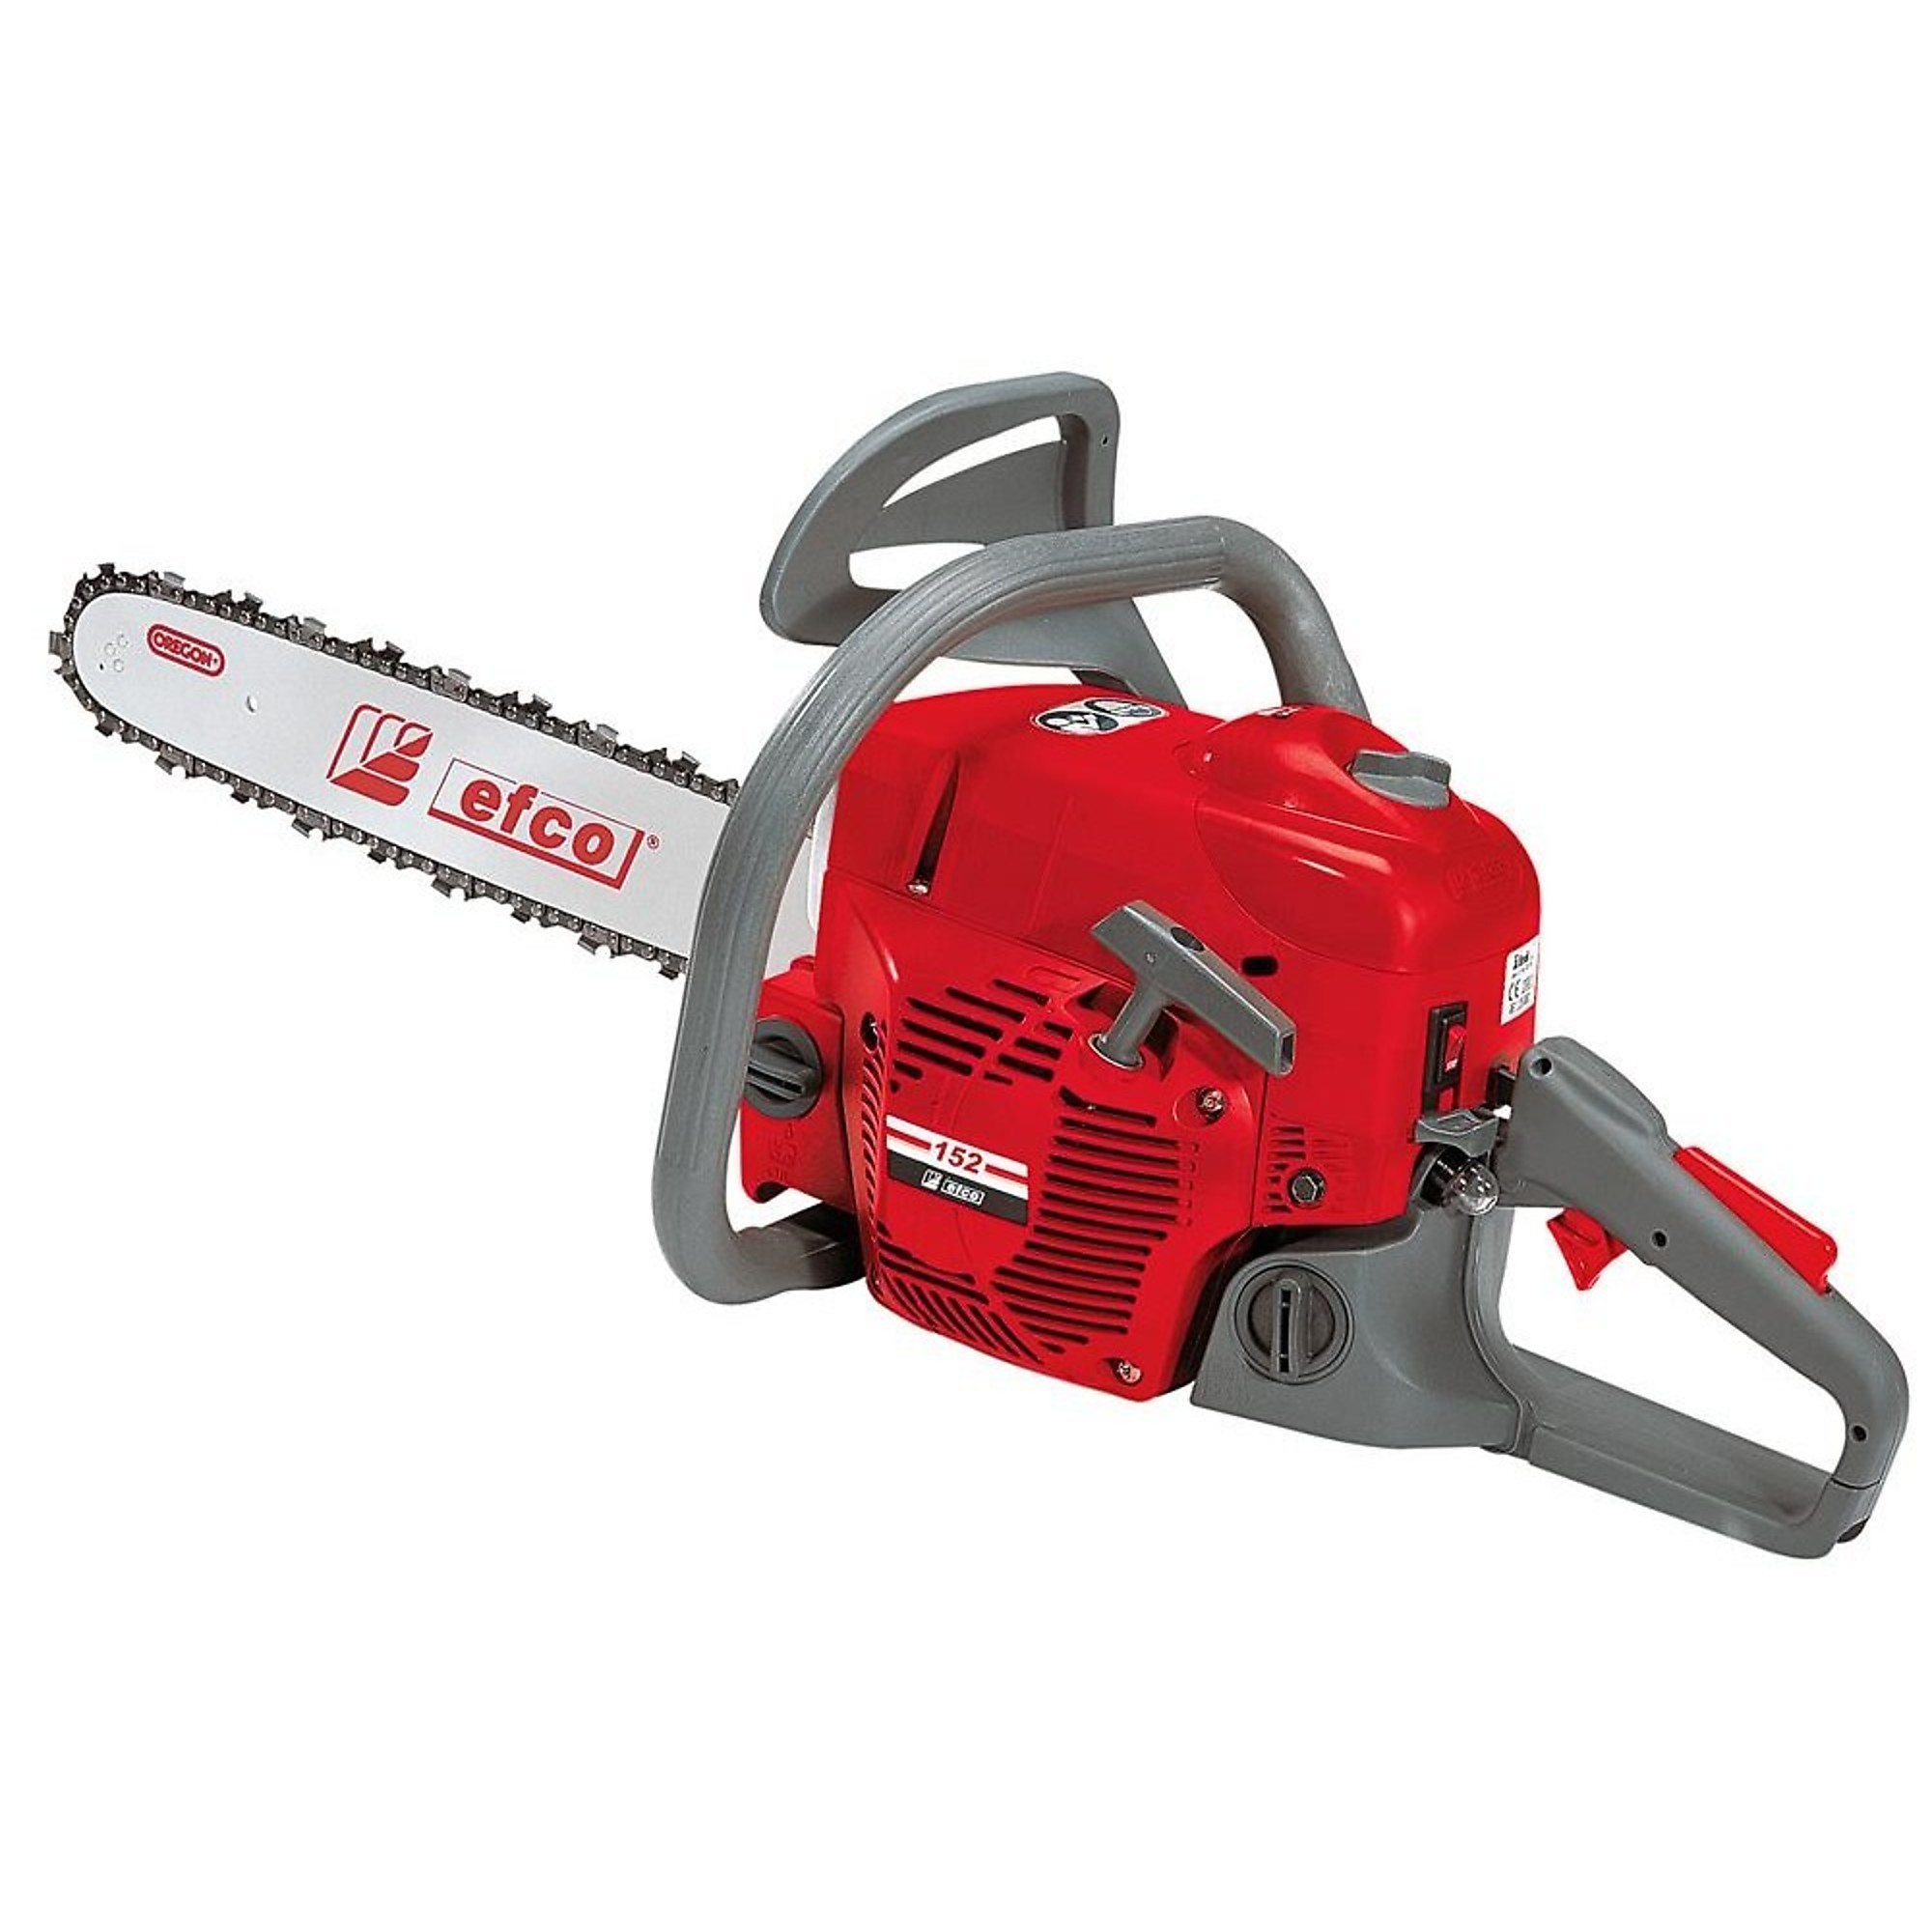 Efco, MT-Series Gas Chainsaw, Bar Length 20 in, Engine Displacement 51.7 cc, Model MT5200-20